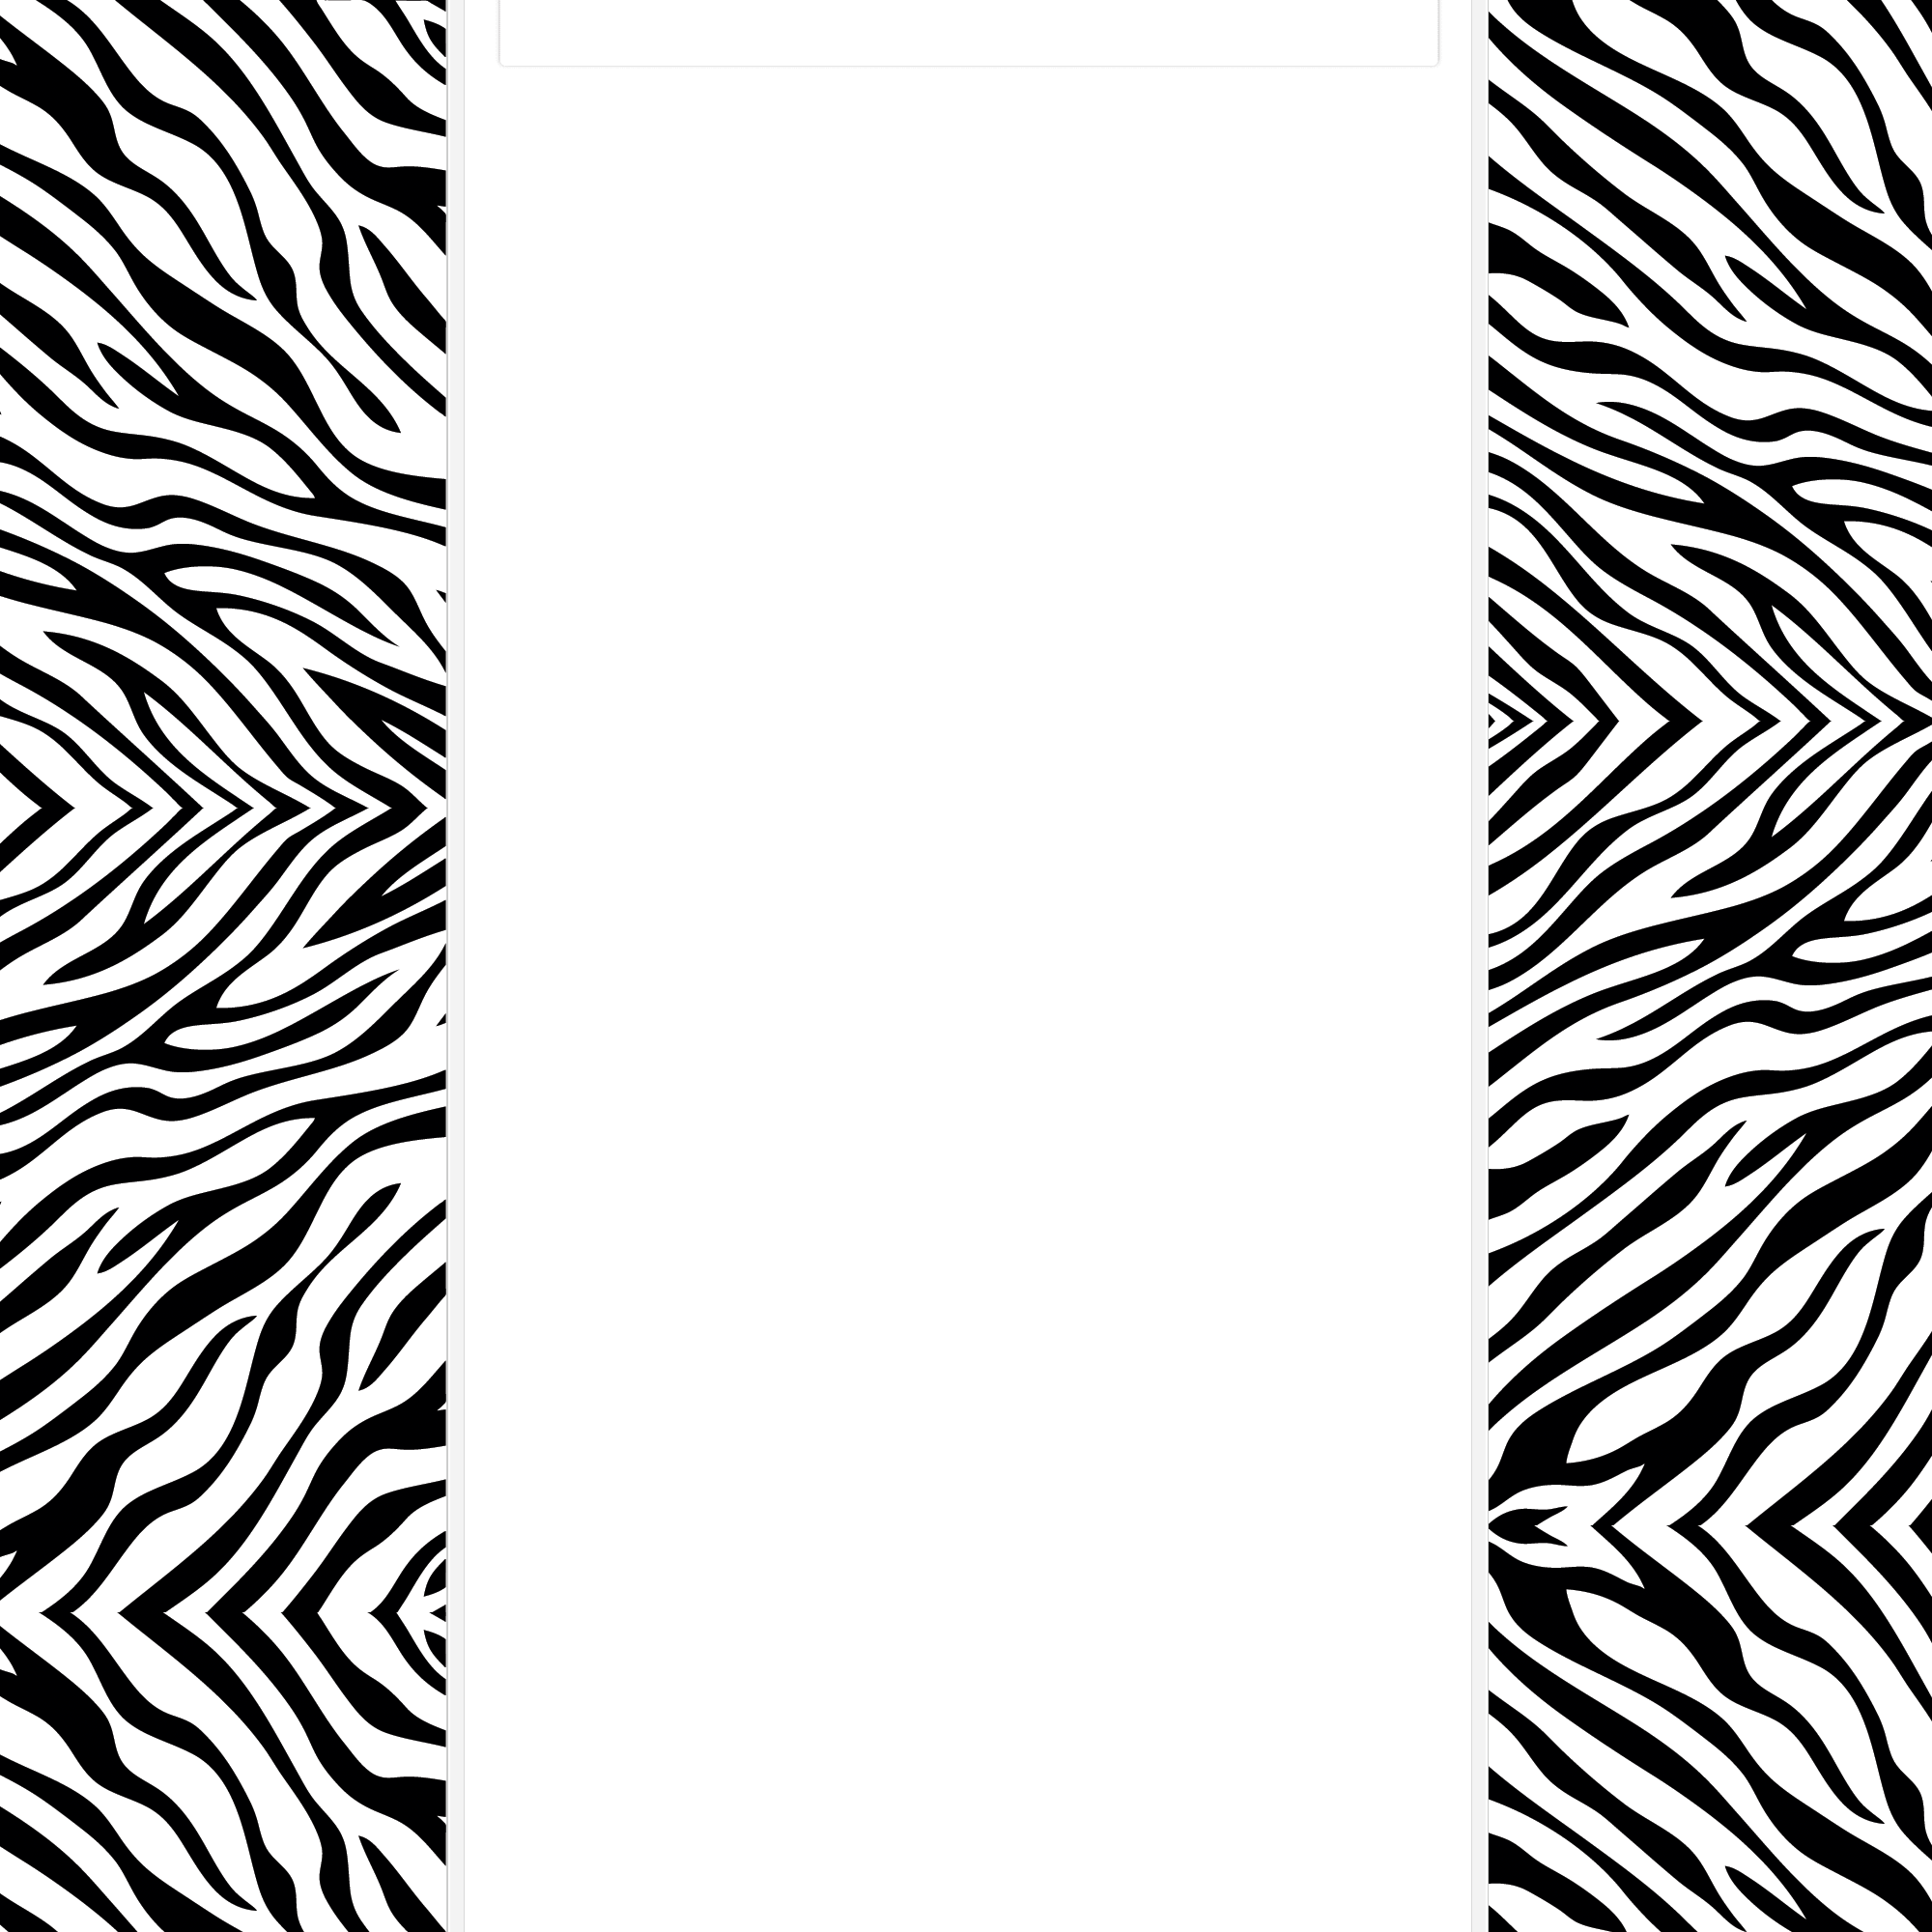 26 Backgrounds Zebra Print Free Cliparts That You Can Download To You